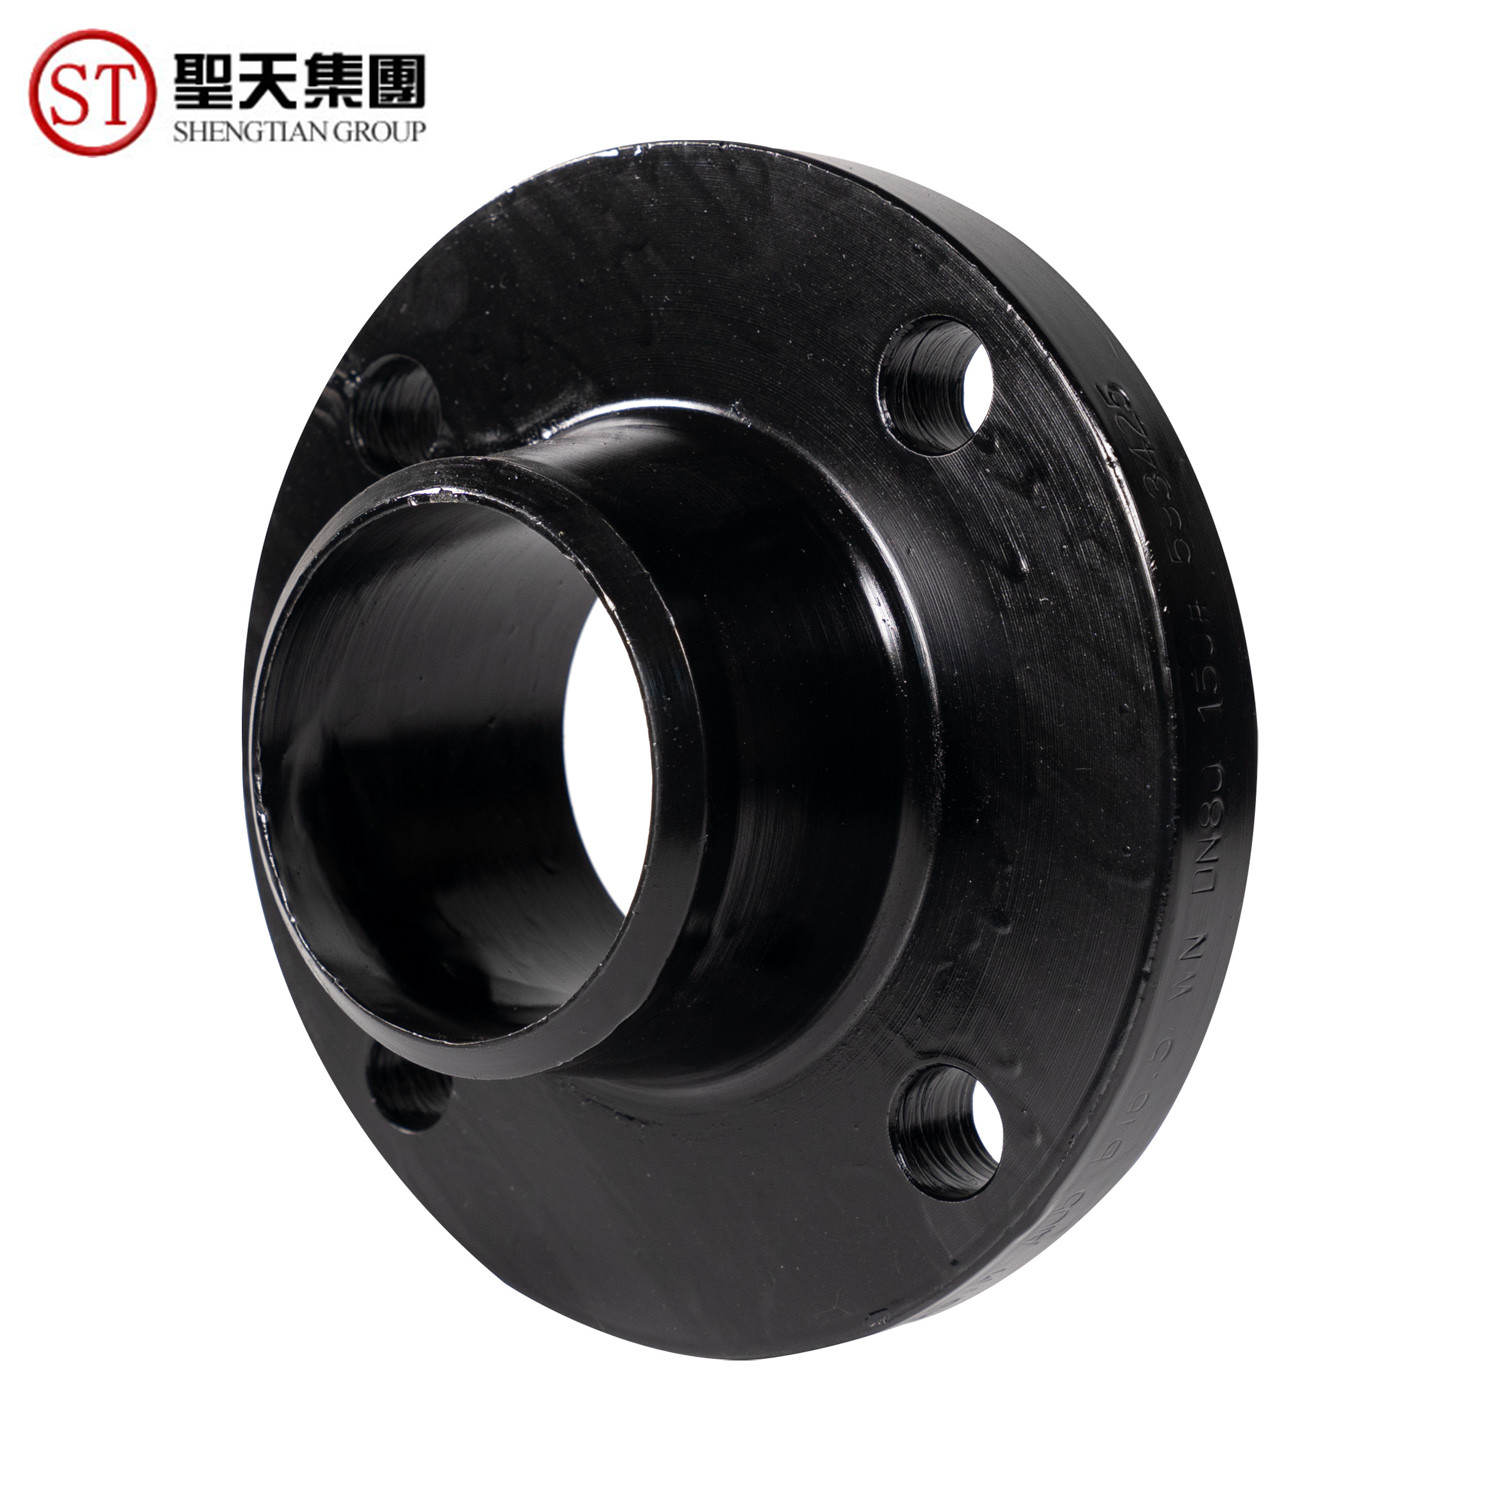 Asme B16.5 Cs Forged Rf 300lb Sch40 Weld Neck Pipe Flanges